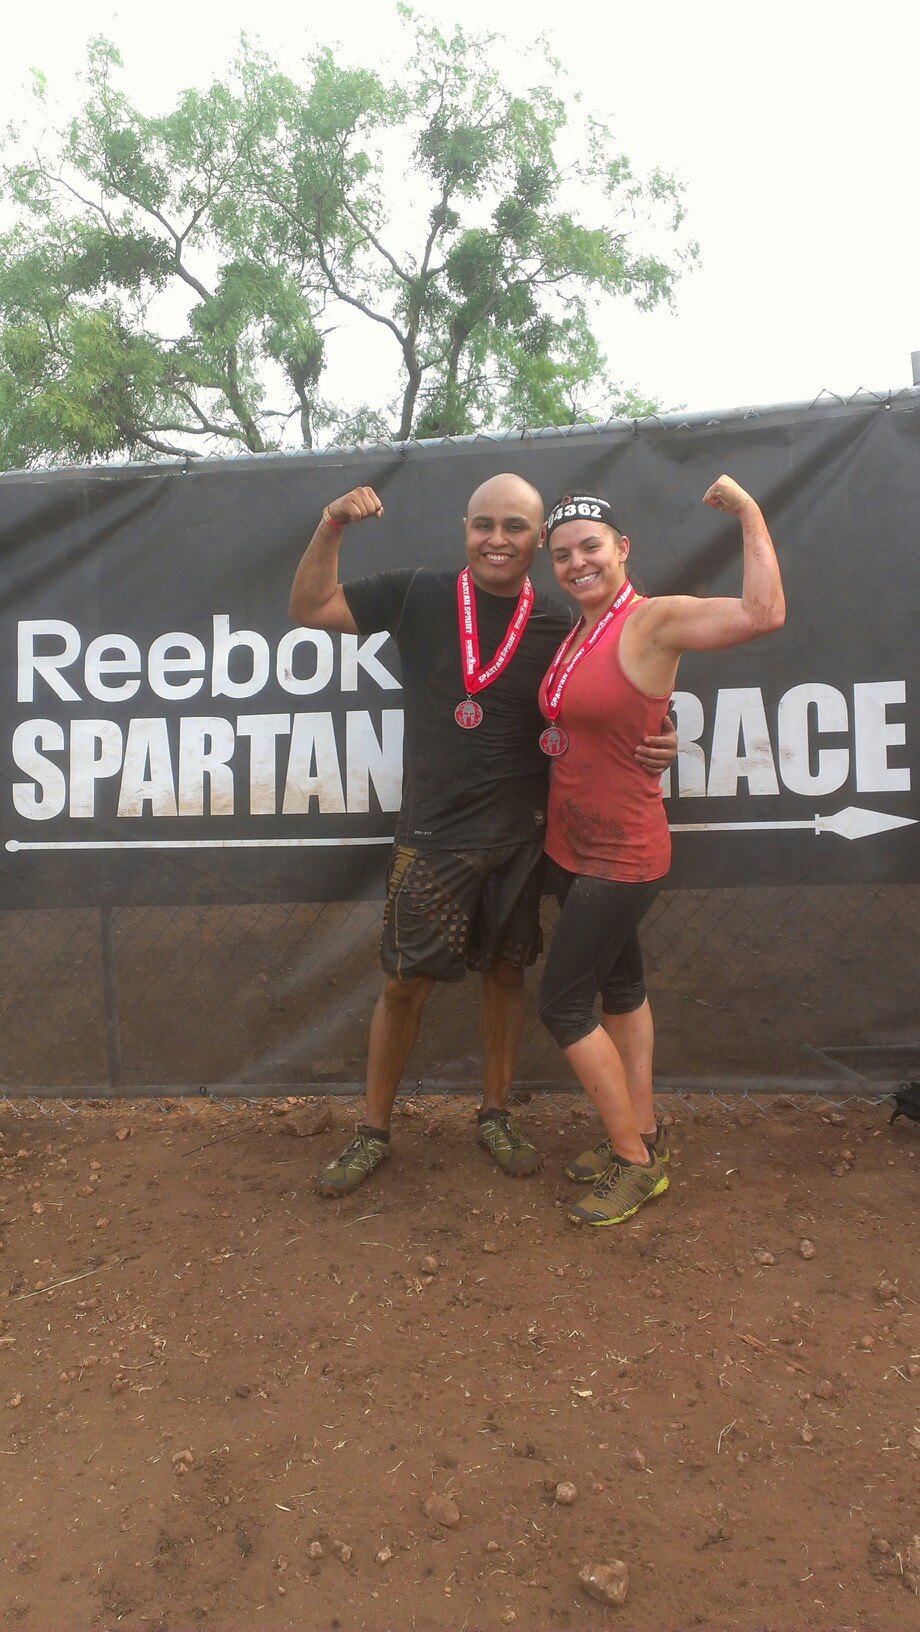 Me and my wife finishing the 2013 Spartan Sprint